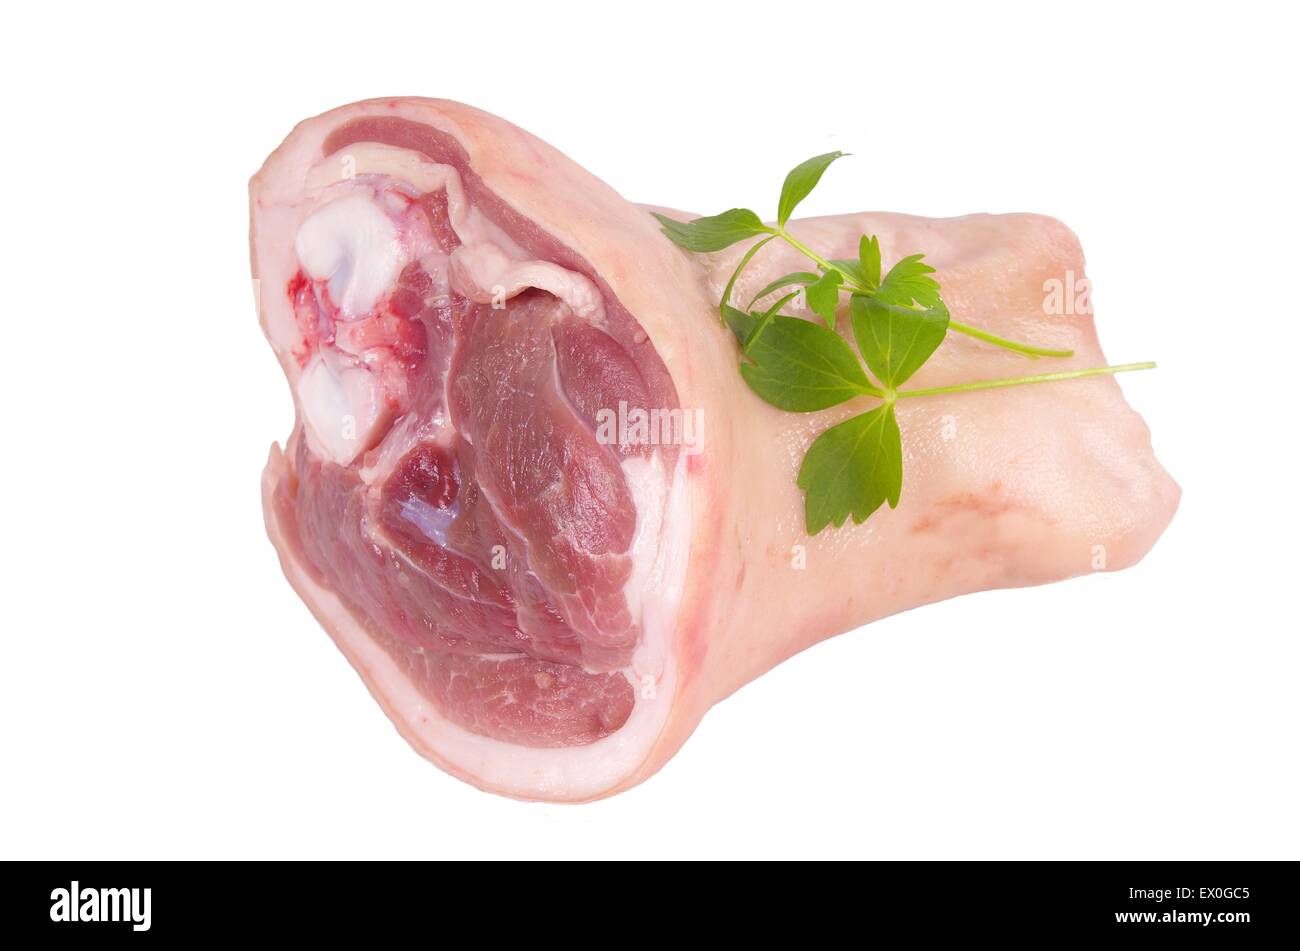 raw knuckle of pork on white background Stock Photo